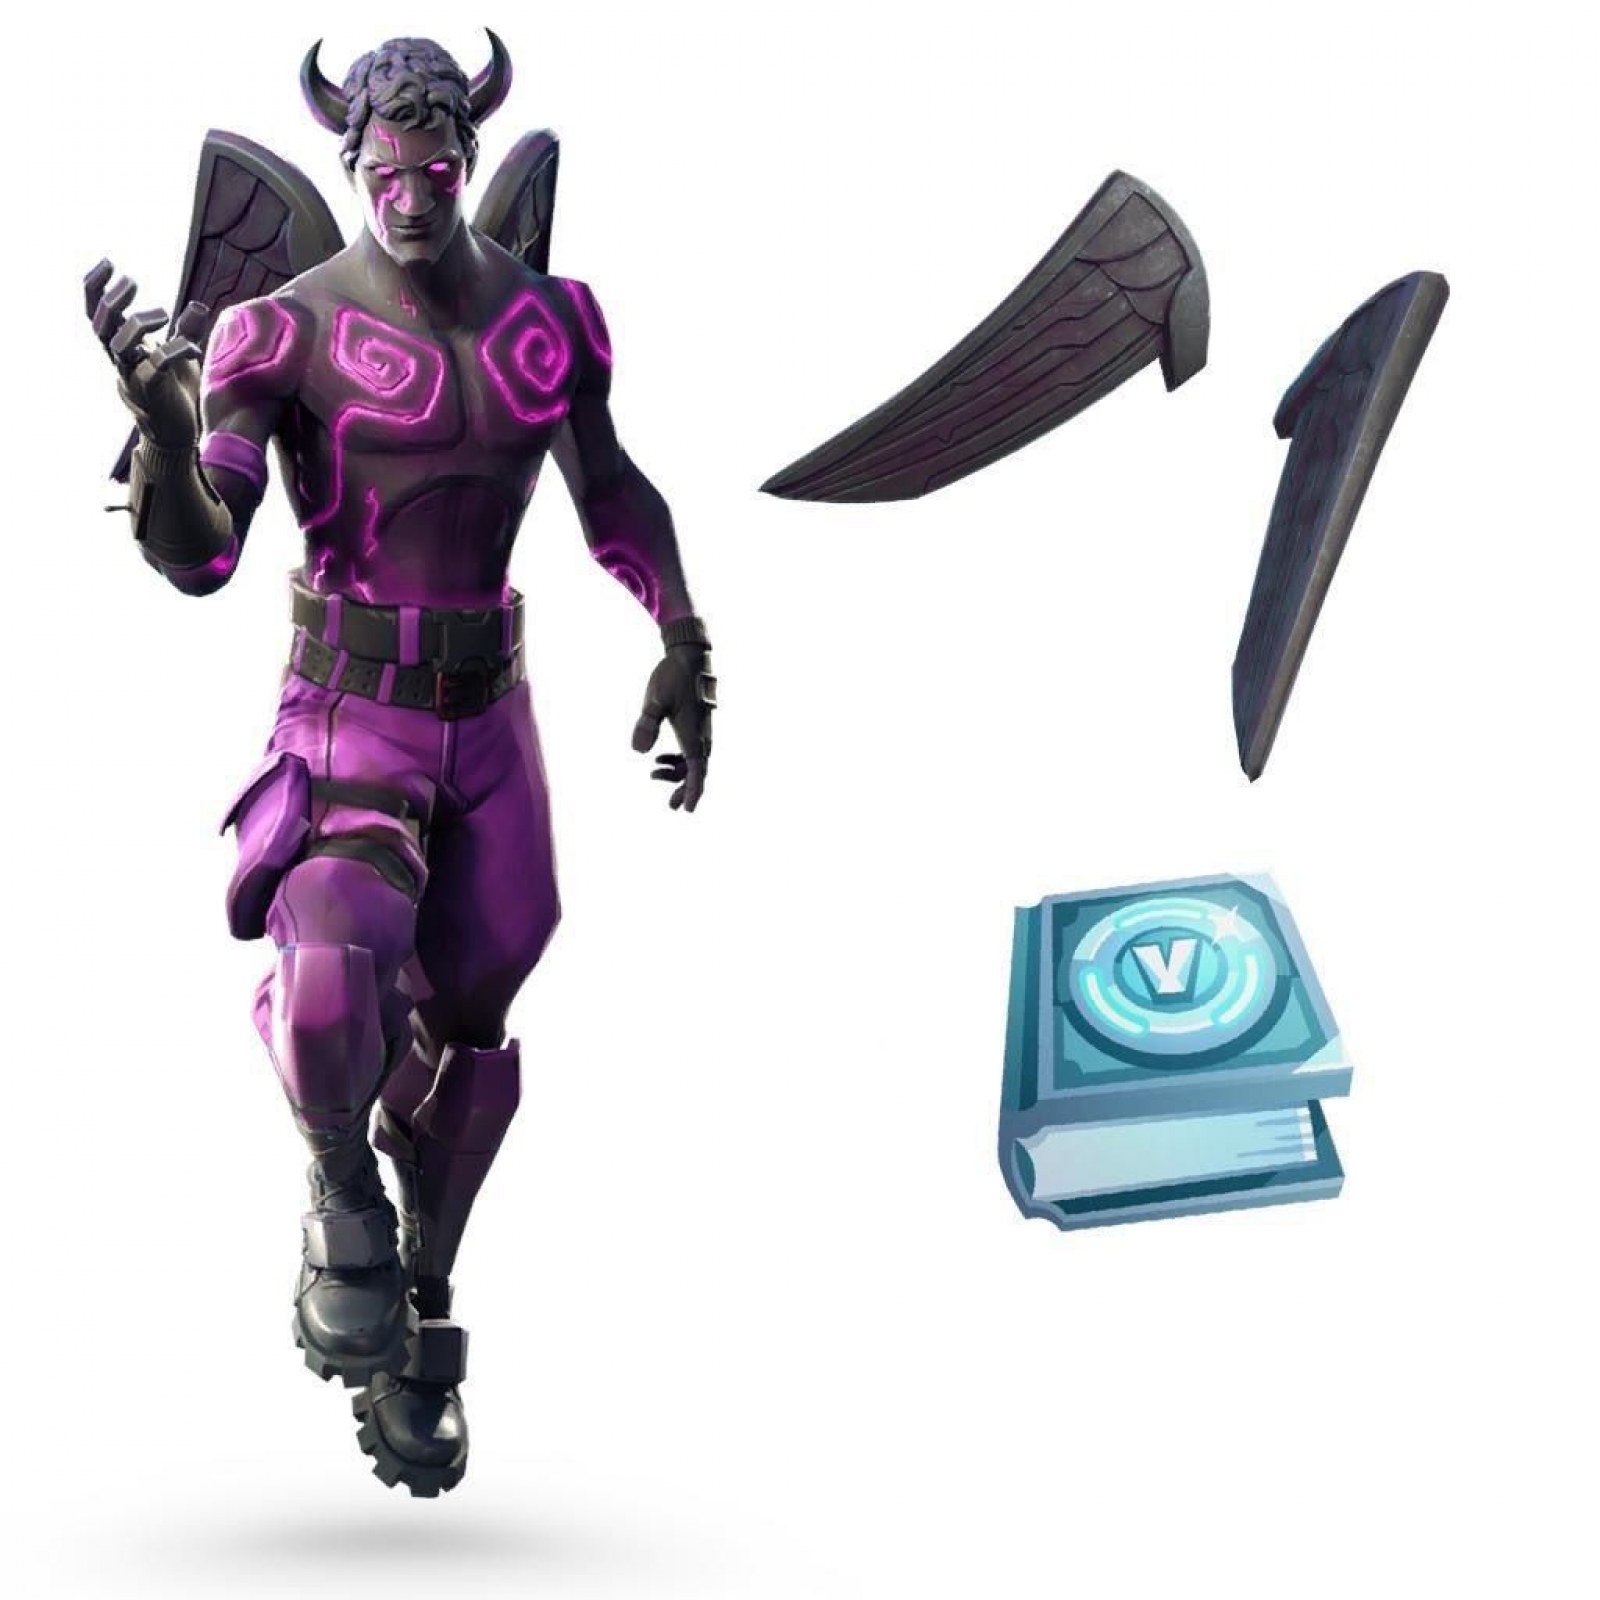 How To Get The Fallen Angel Fortnite Fortnite Fallen Love Ranger Pack Challenges How To Unlock New Skin For Free Technically